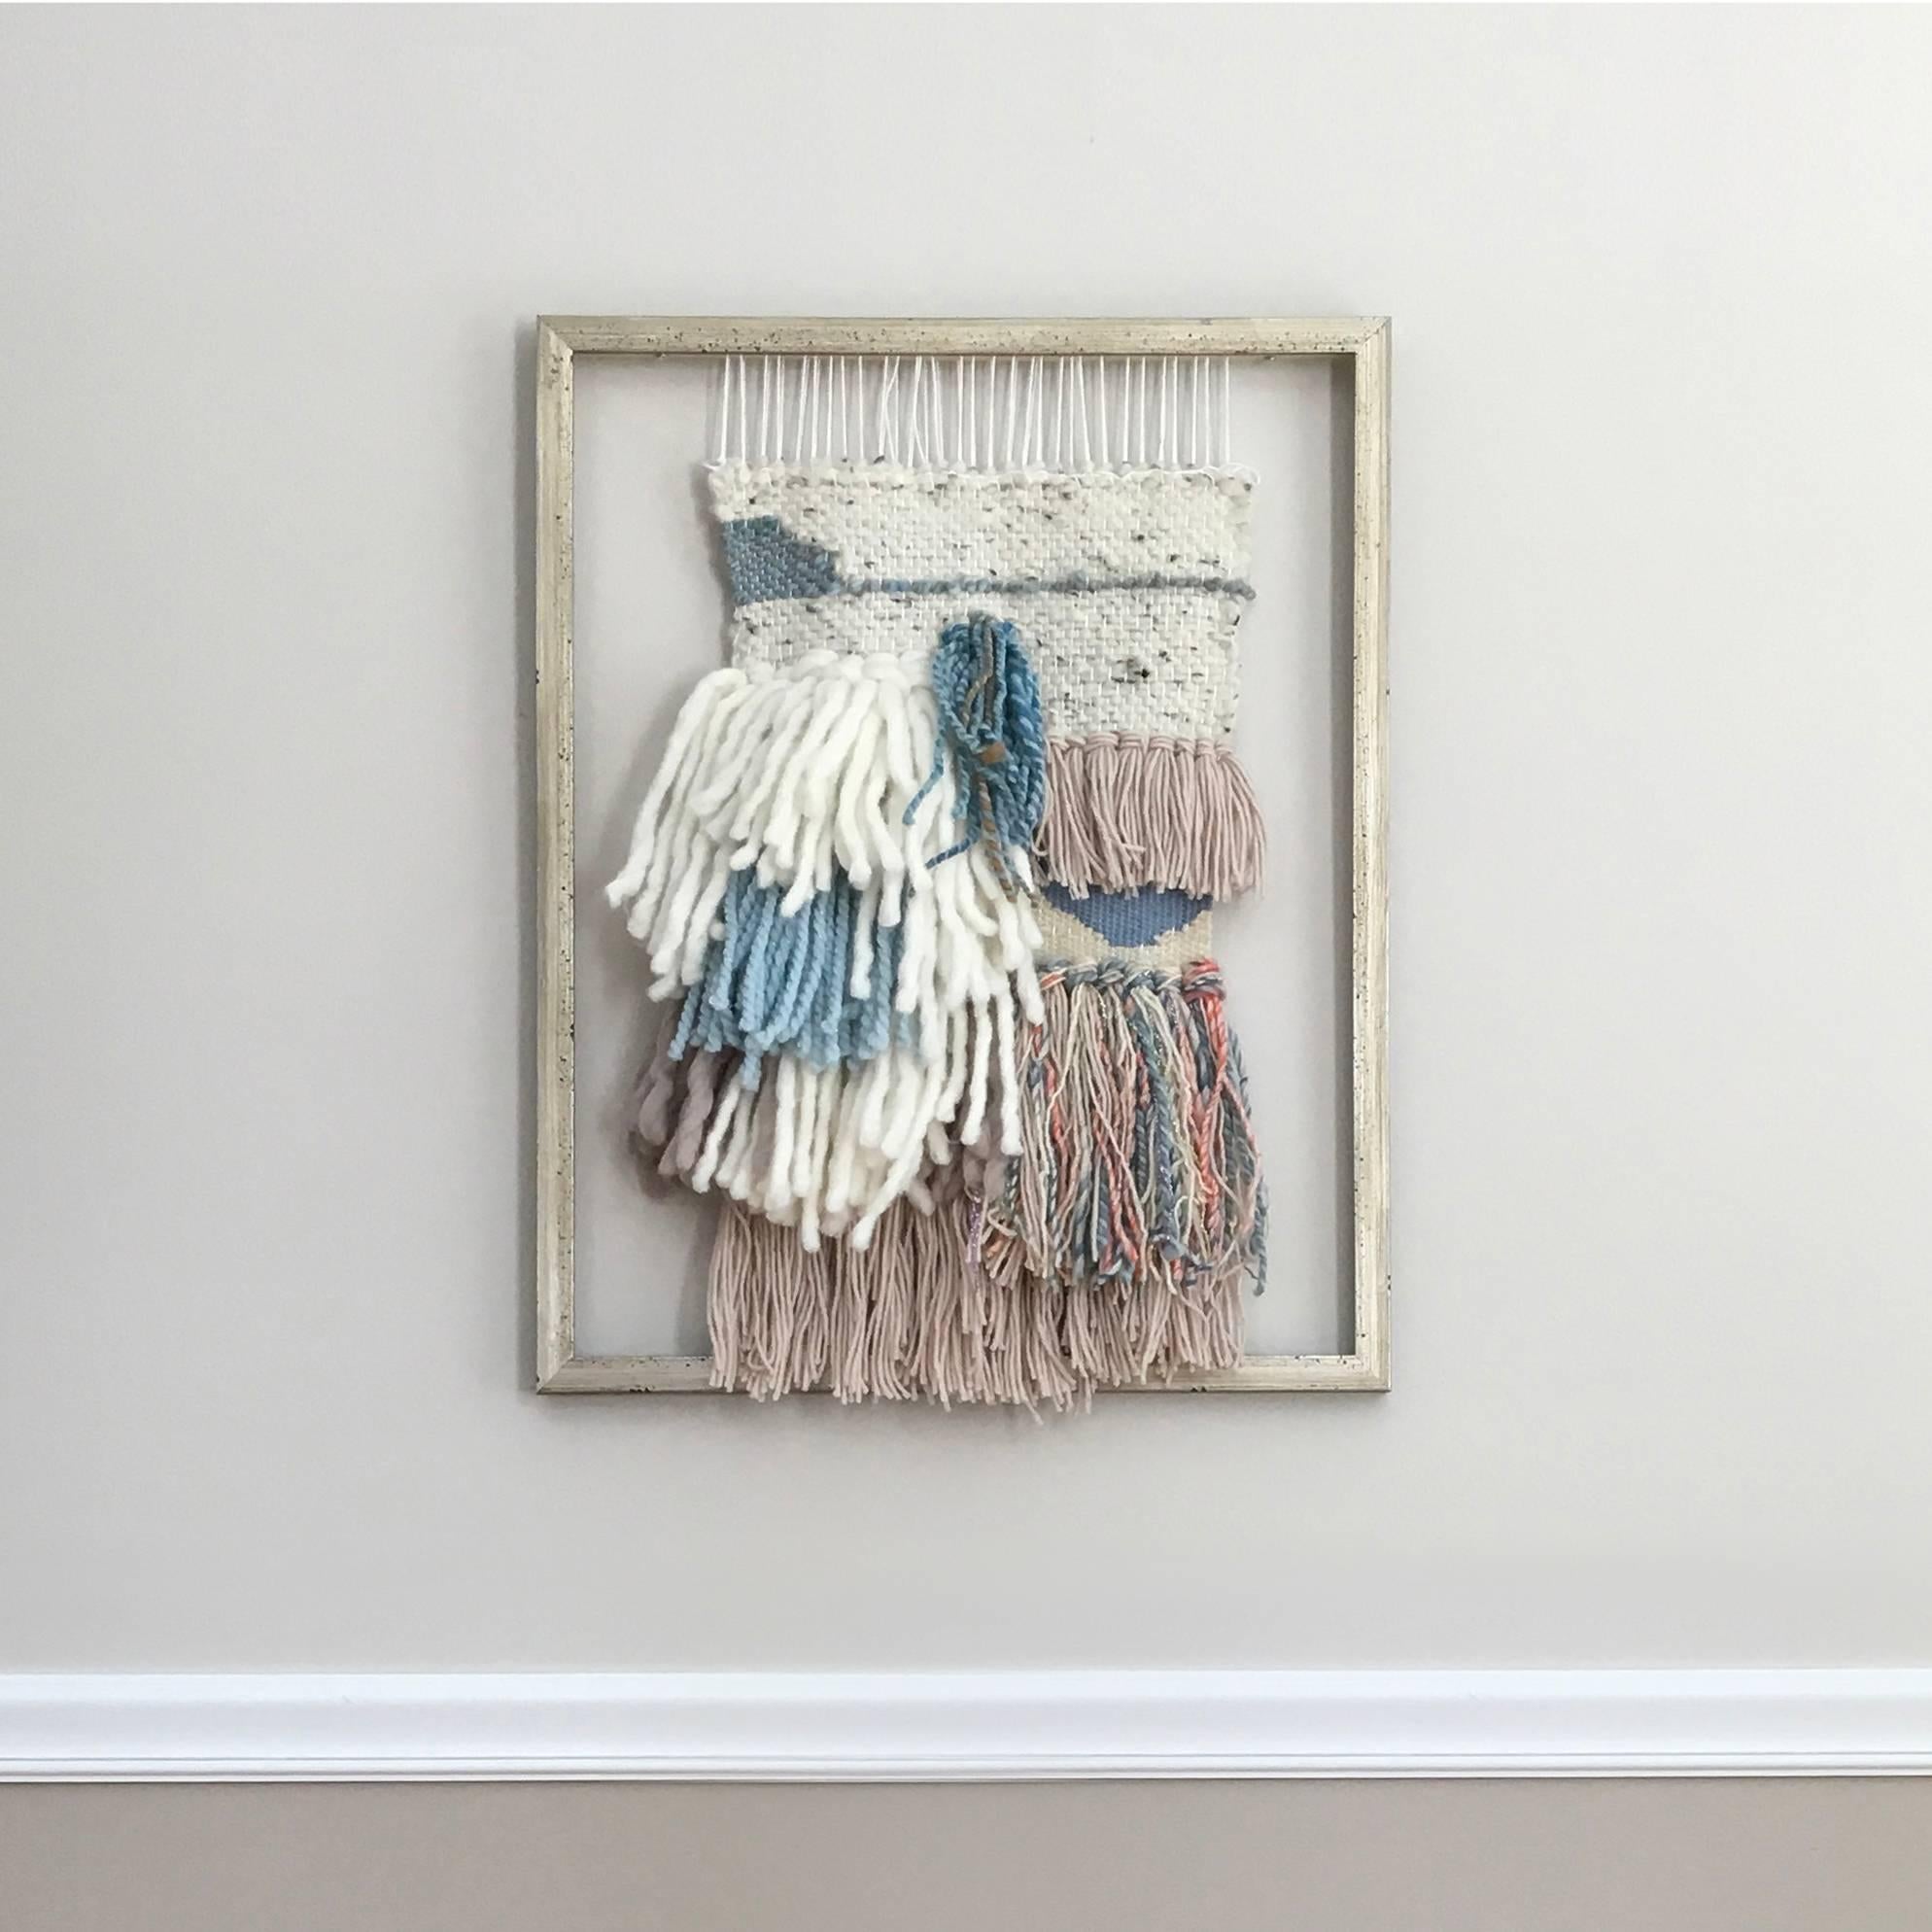 'Morning Frost', Contemporary Wall Hanging Sculpture - Mixed Media Art by Dolores Tema